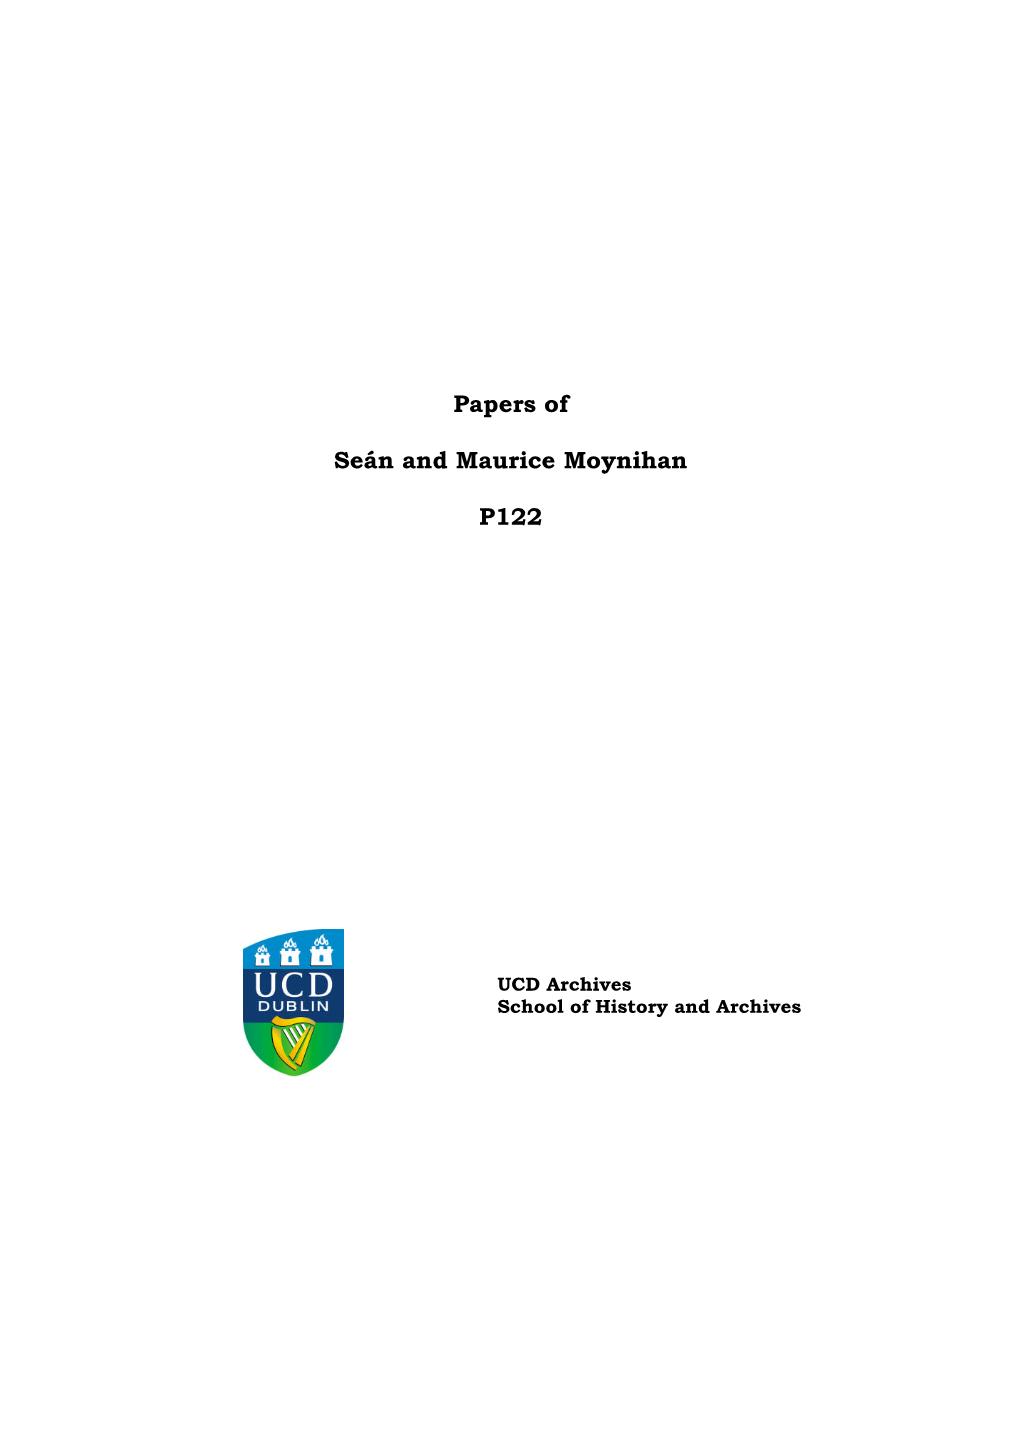 Papers of Seán and Maurice Moynihan P122